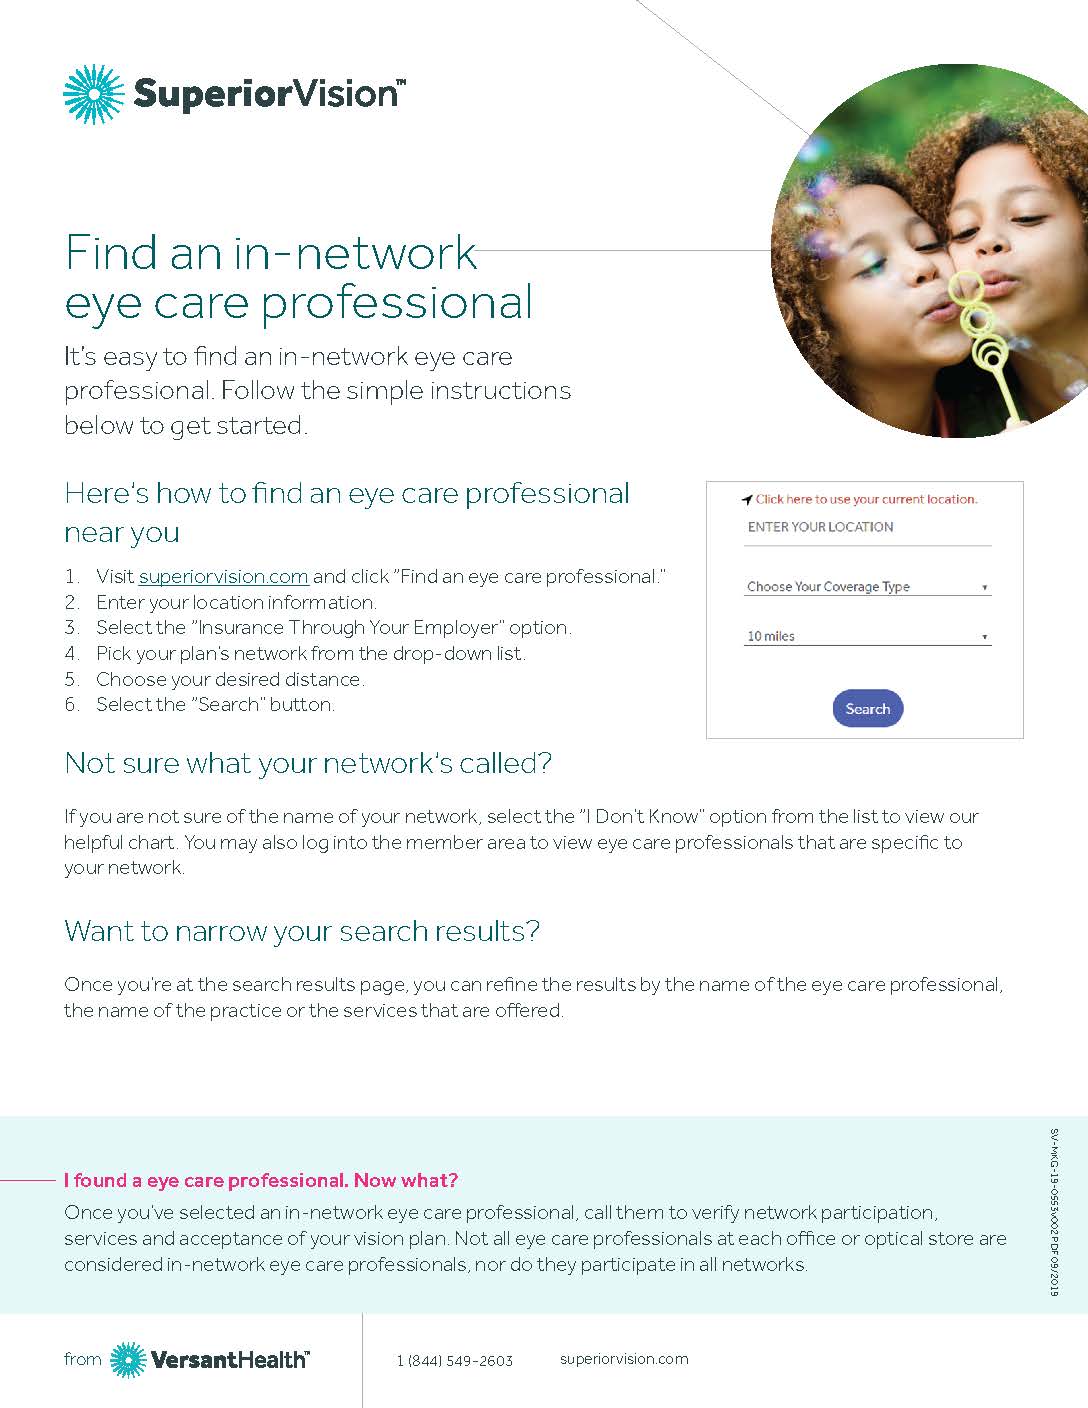 Flyer image for Superior Vision to Find an In-Network Eye Care Professional